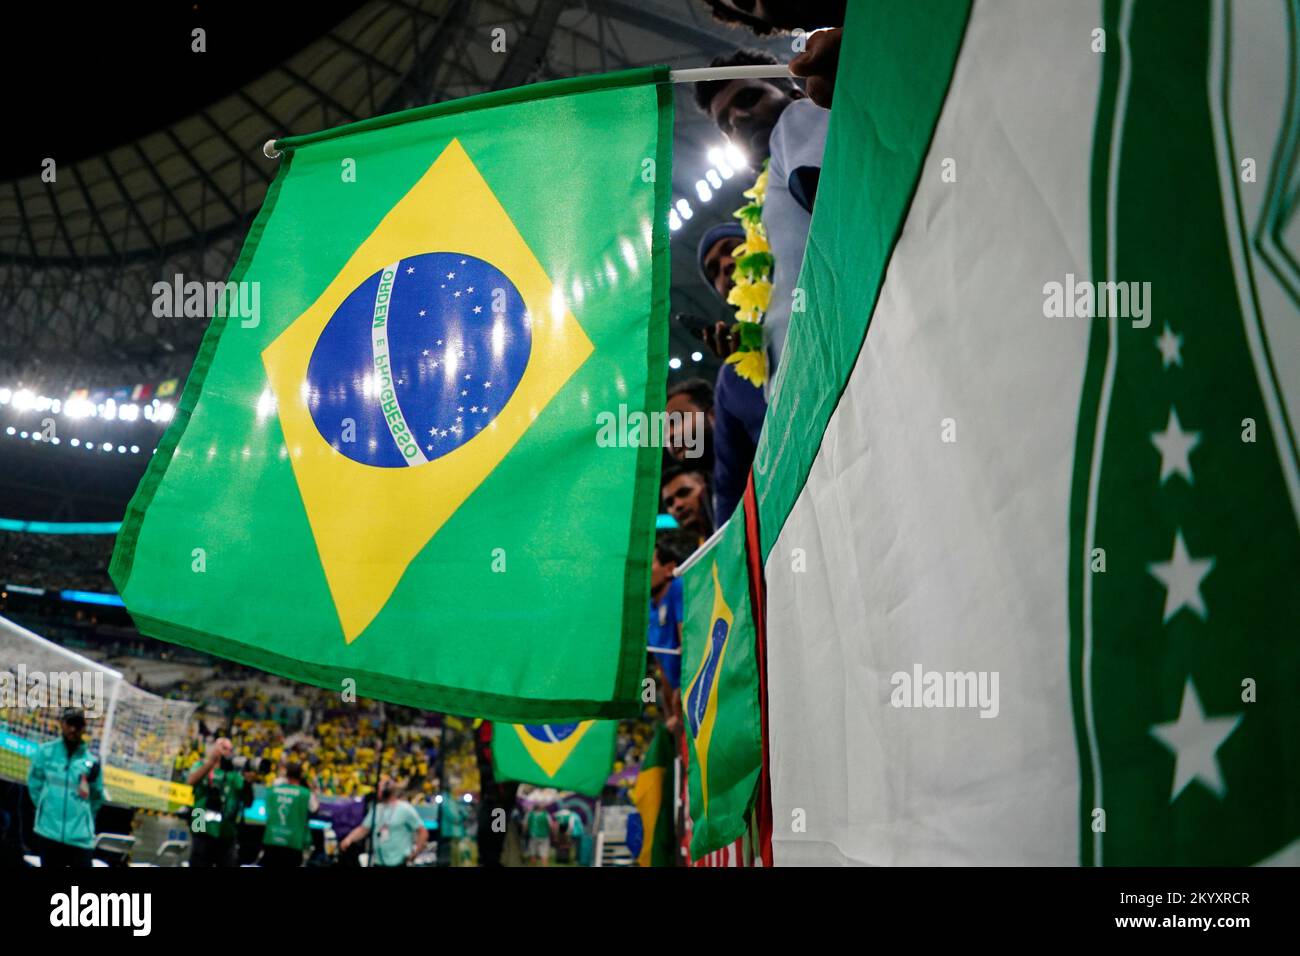 FIFA World Cup Group G Preview: Can Brazil Go All the Way?